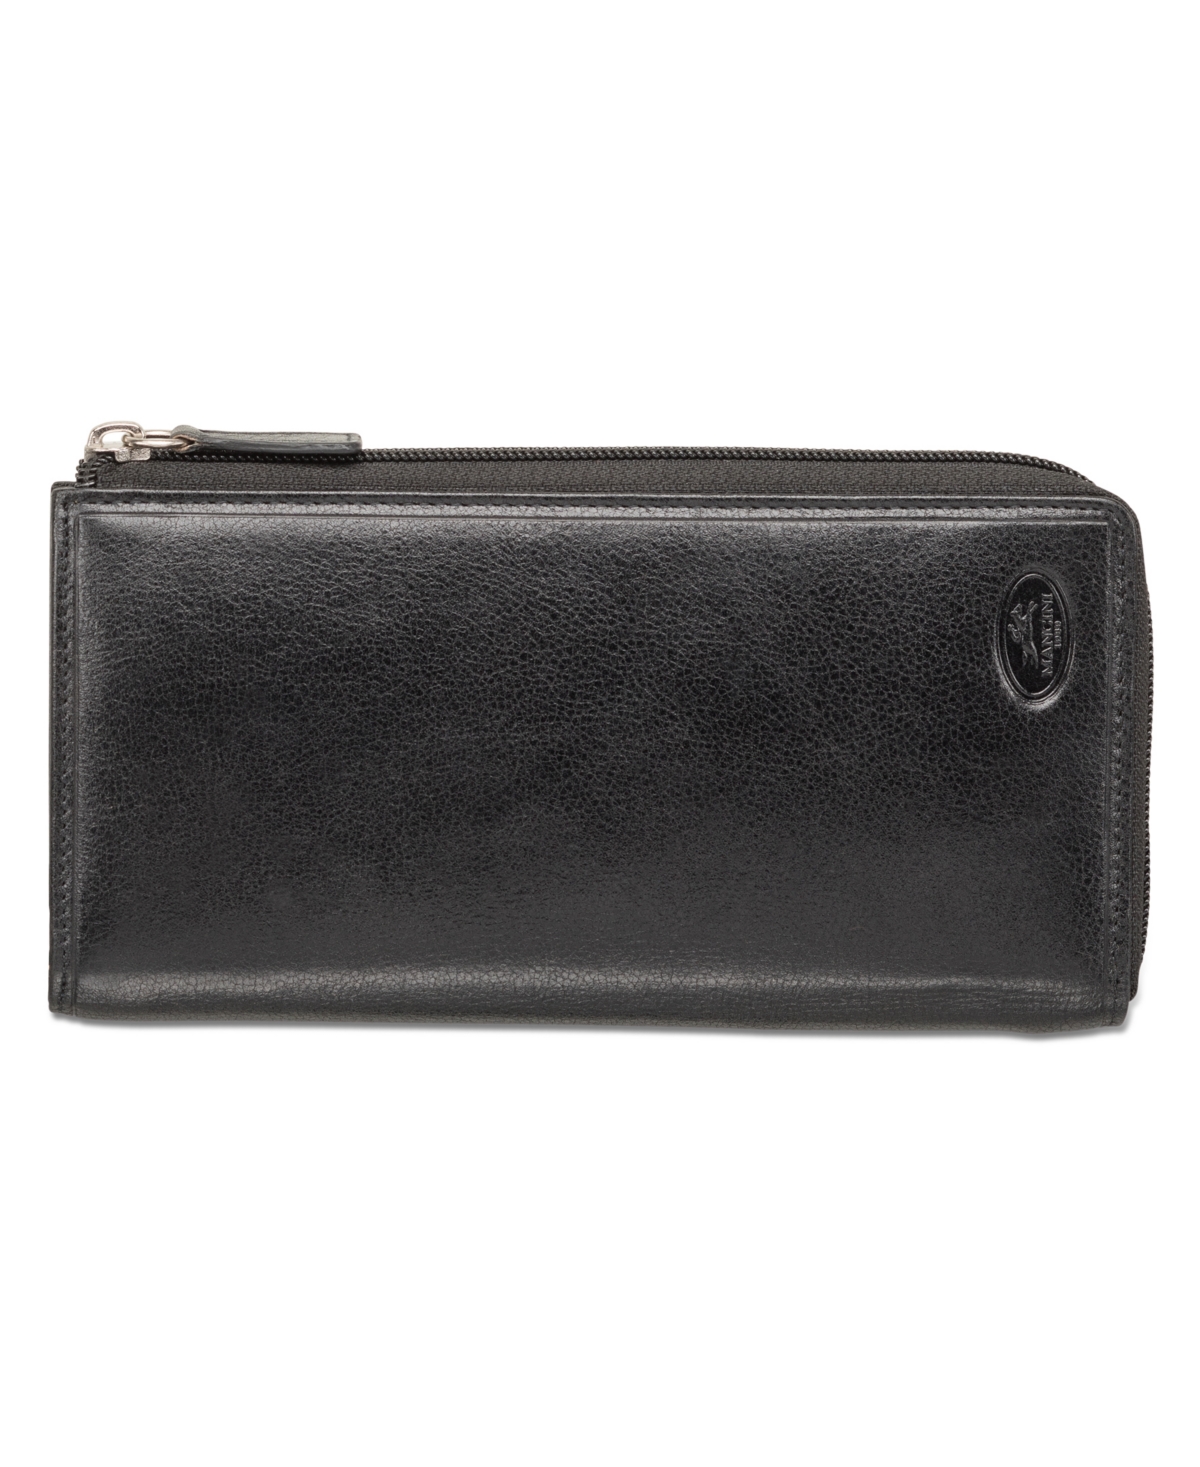 Equestrian-2 Collection Rfid Secure Large Trifold Wallet - Black